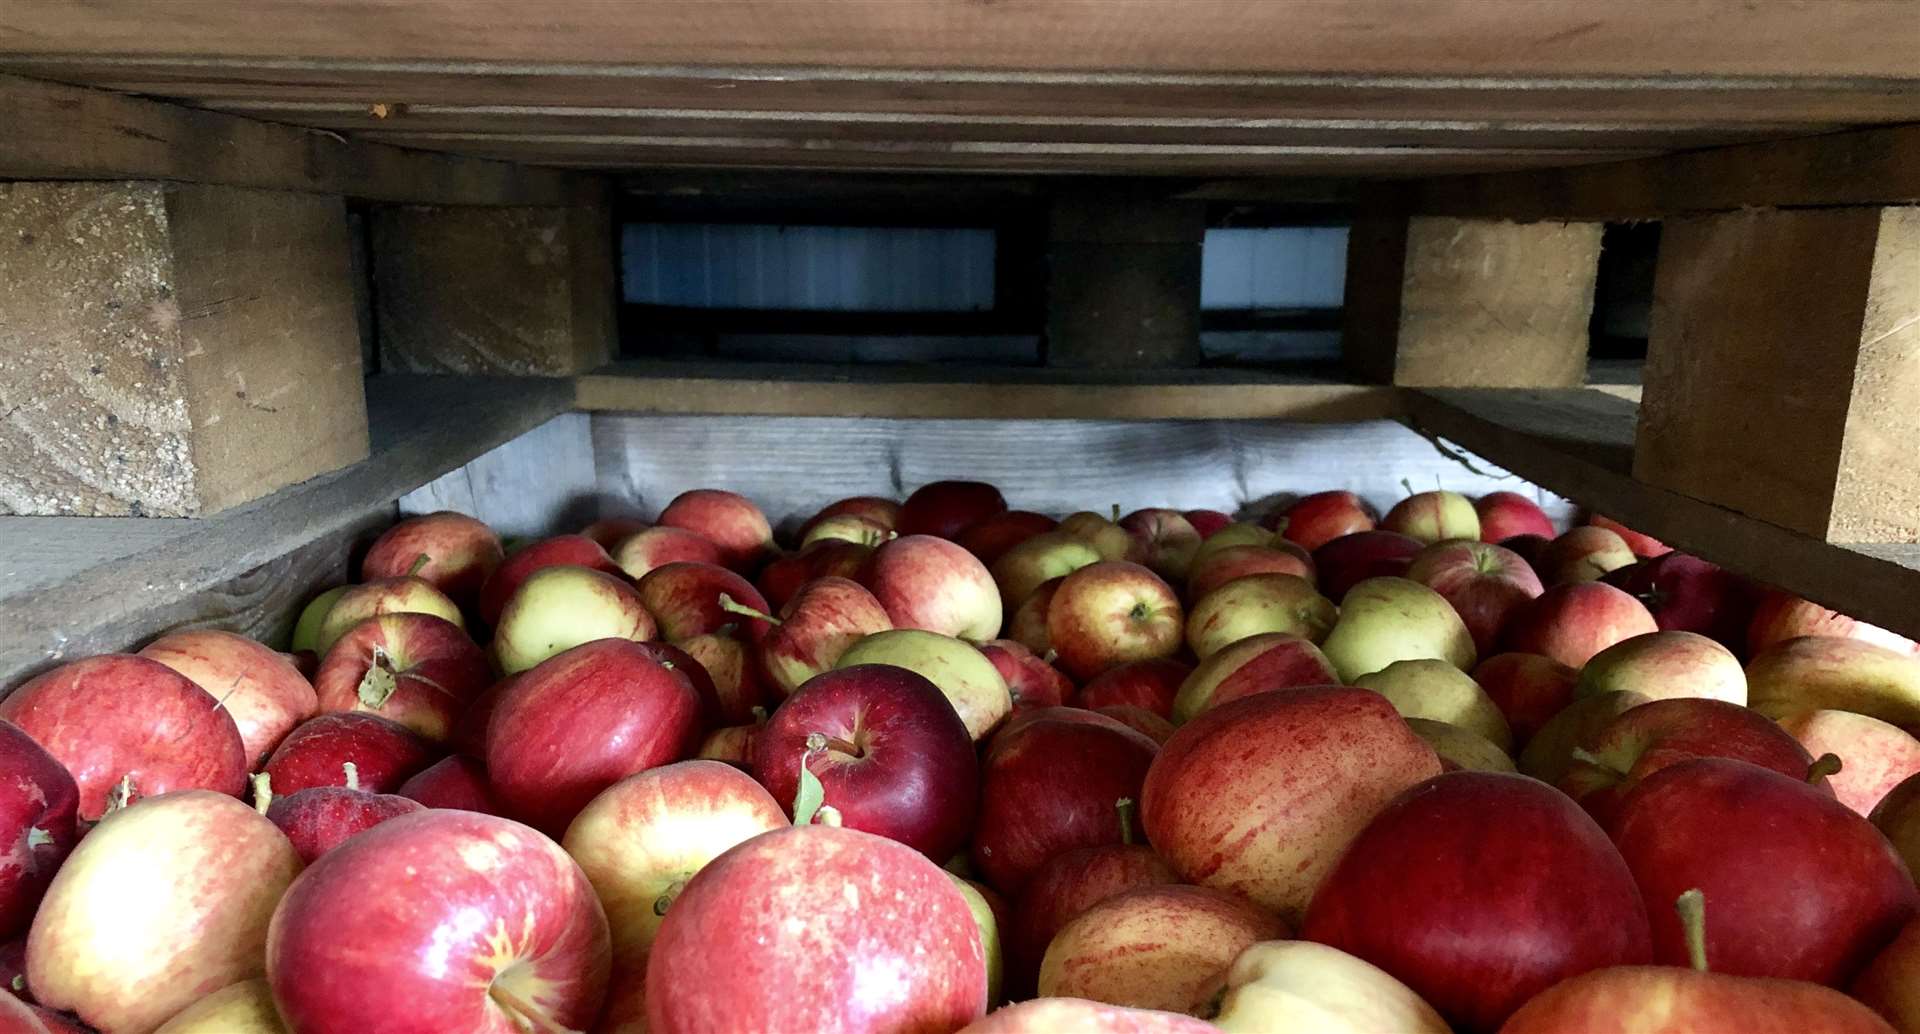 AC Goatham currently farm 2,830 acres of orchards in Medway and Kent. The company's partnerships with 20 other growers means that there is an additional 1,000 acres worth of fruit flowing through the business each year.